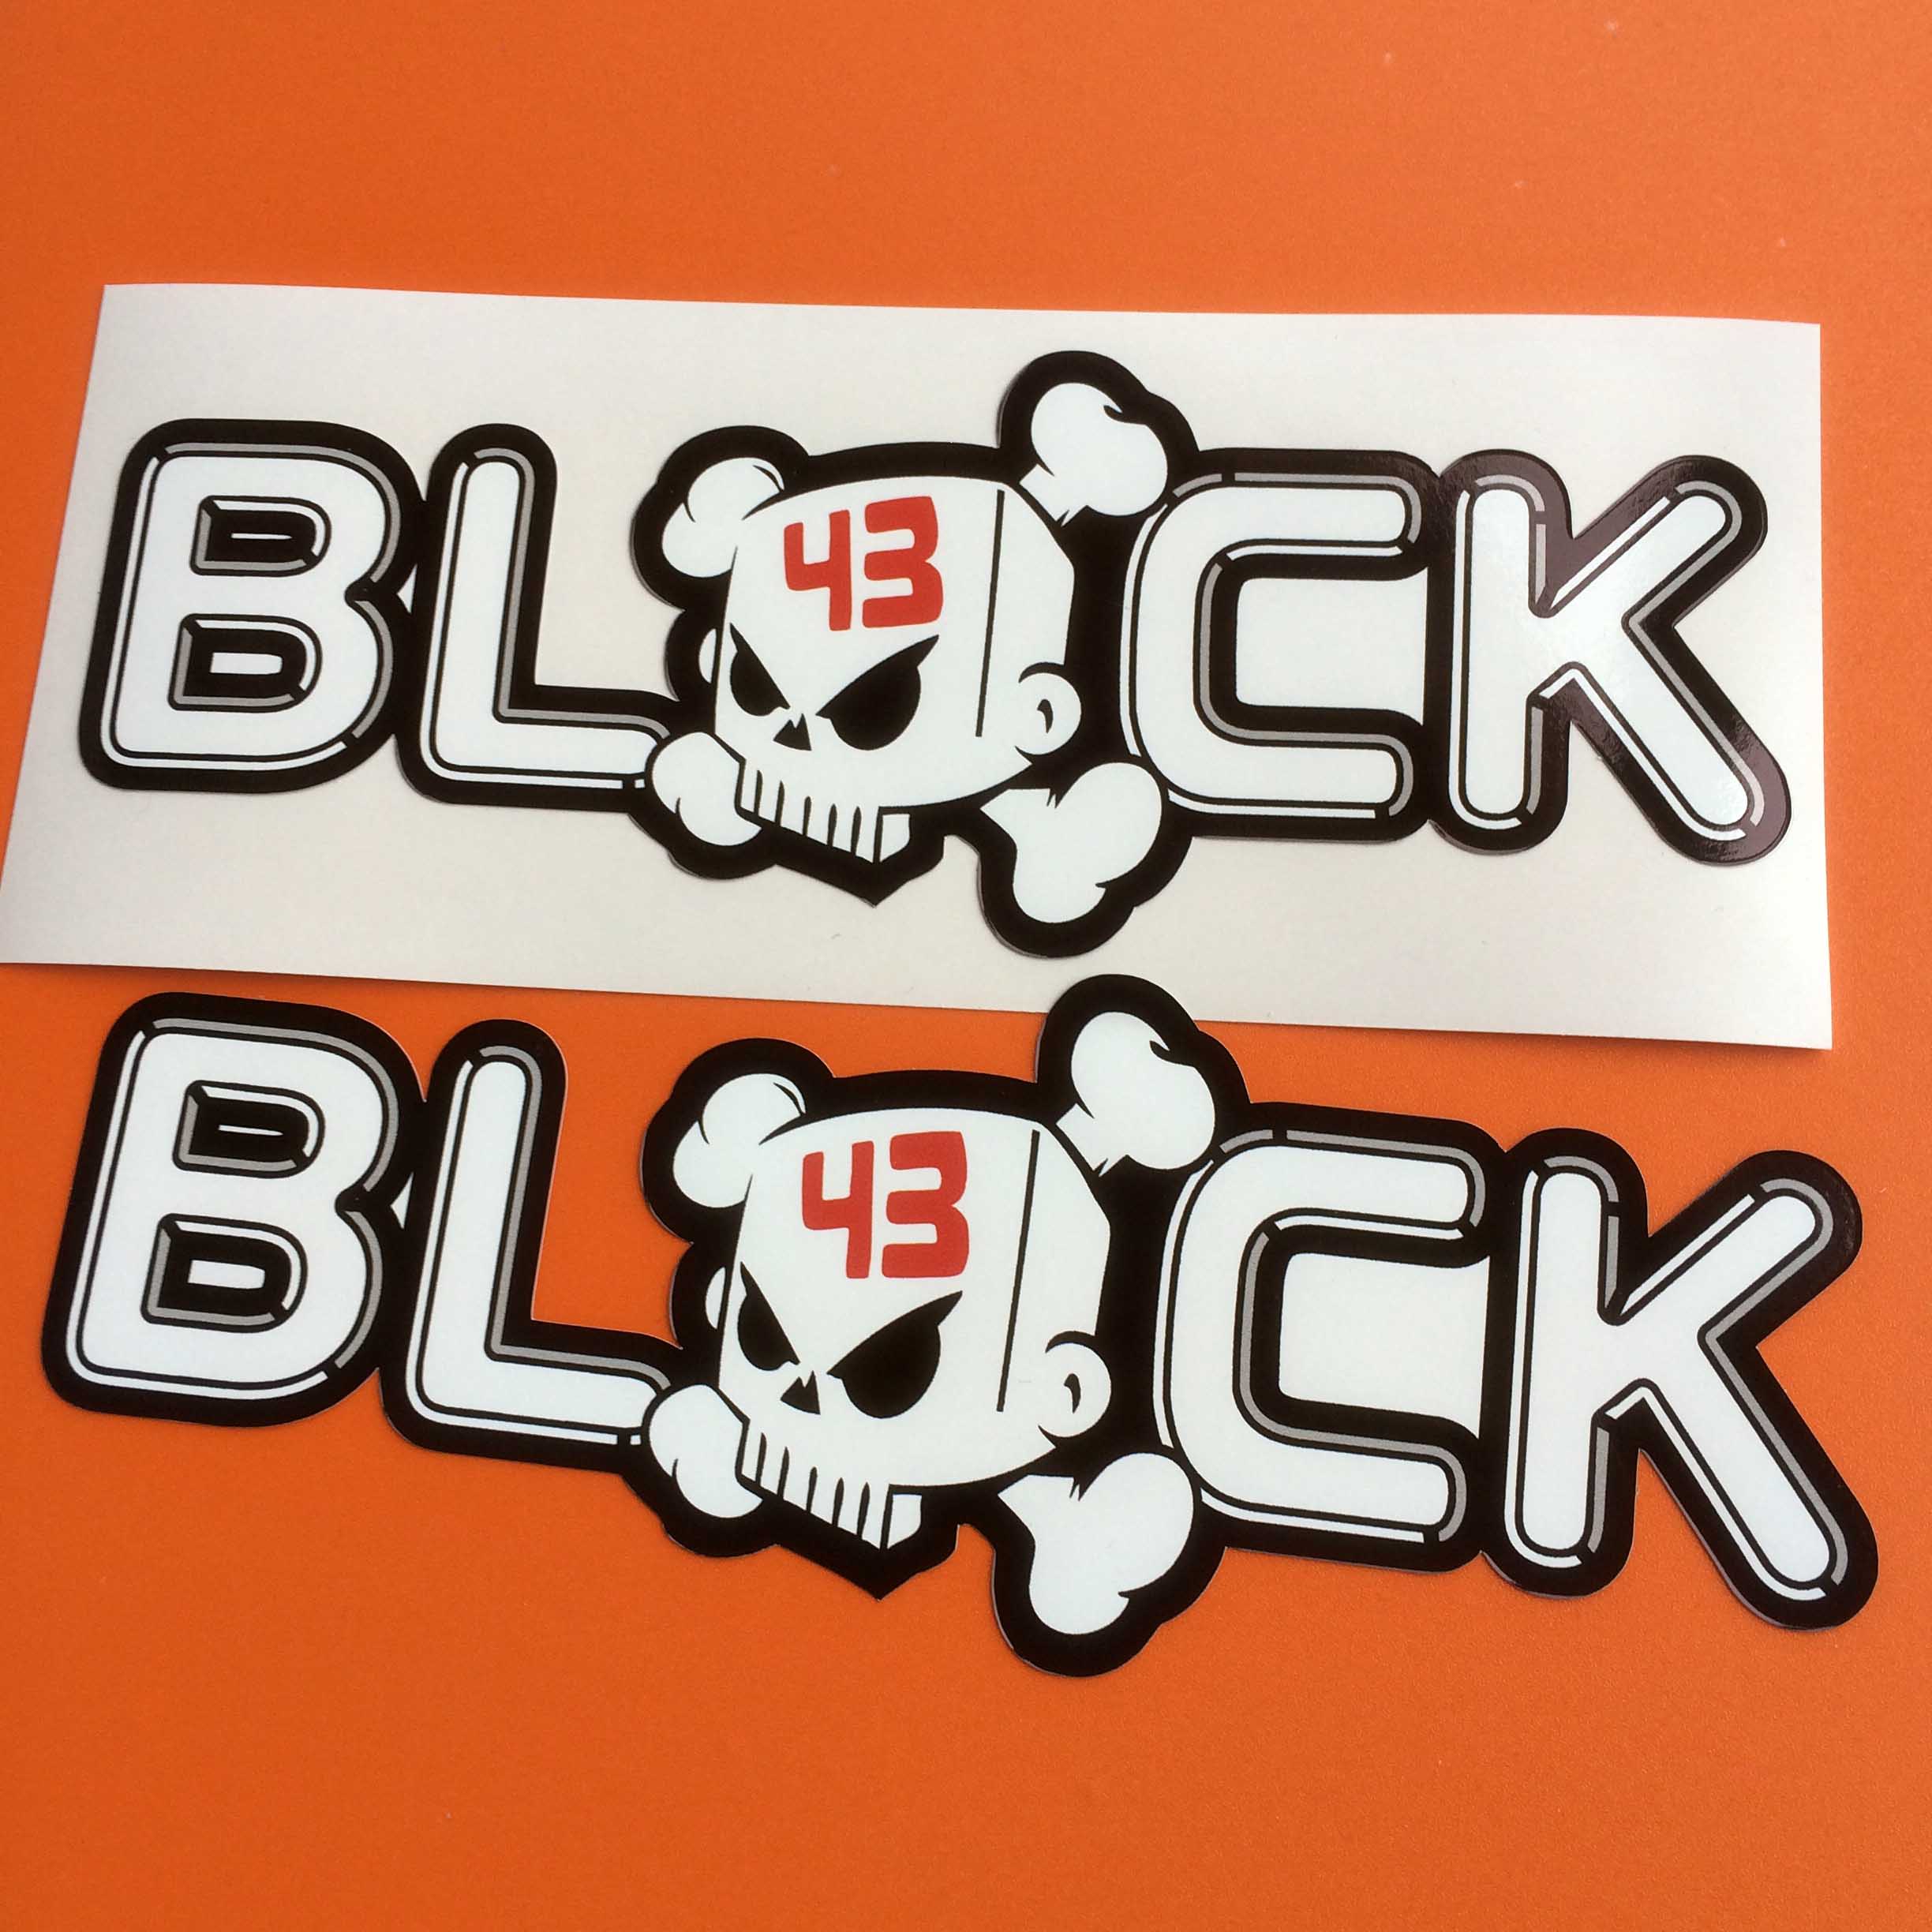 Block in white lettering edged in black. A white skull and crossbones with the number 43 in red on the forehead replaces the letter O in Block.